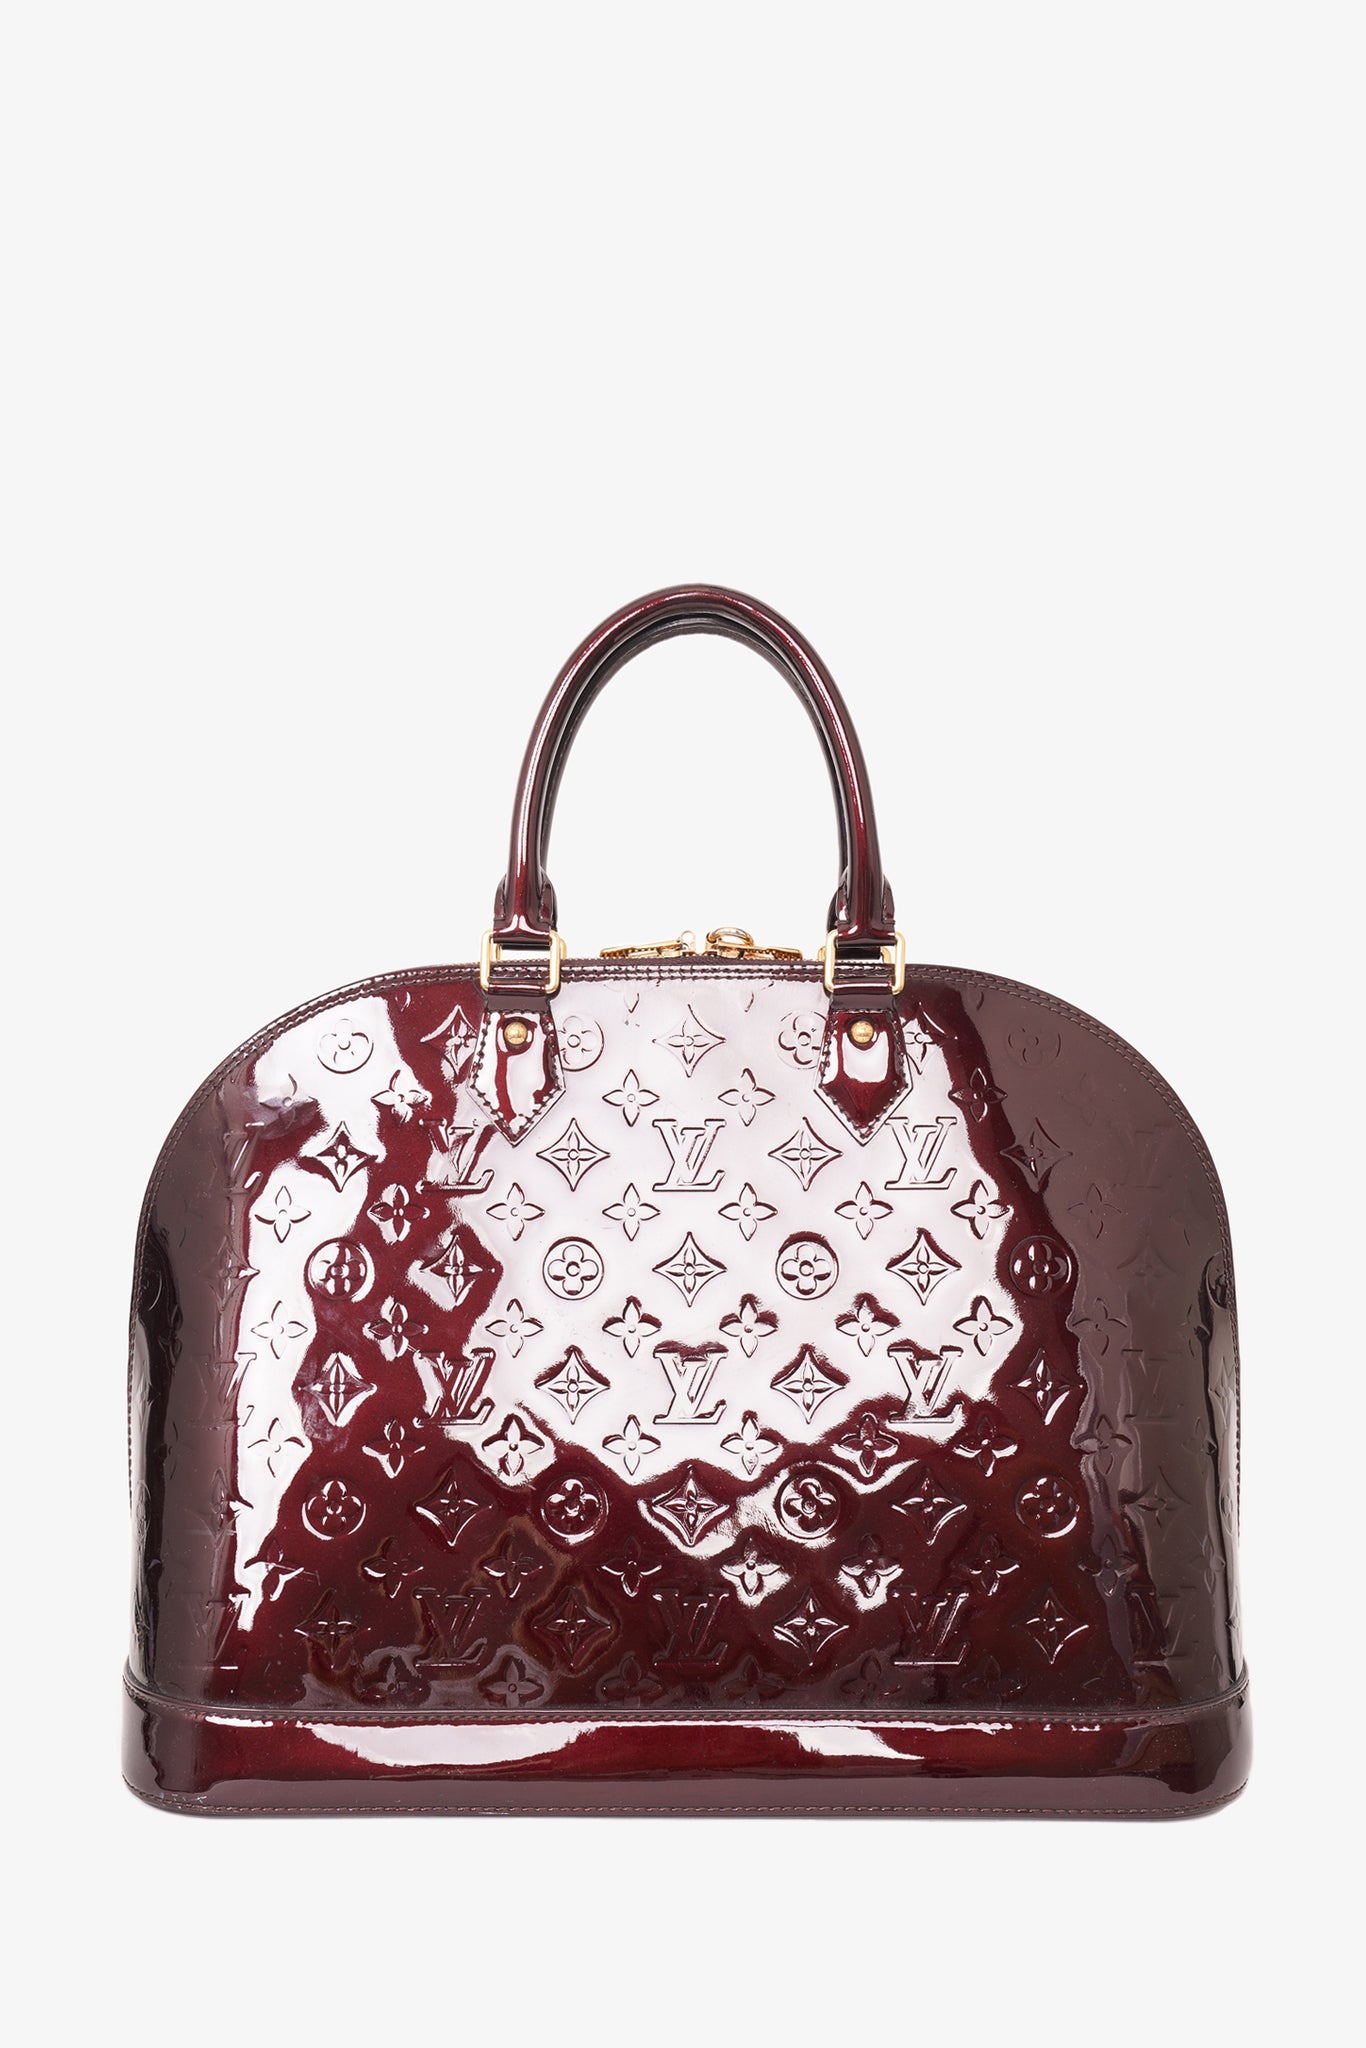 MyHauteCloset.com - We hope that wherever your weekend takes you that you  get there in style. Just in for consignment is a gently used Louis Vuitton  Limited Edition Irene Bag. Minor patina